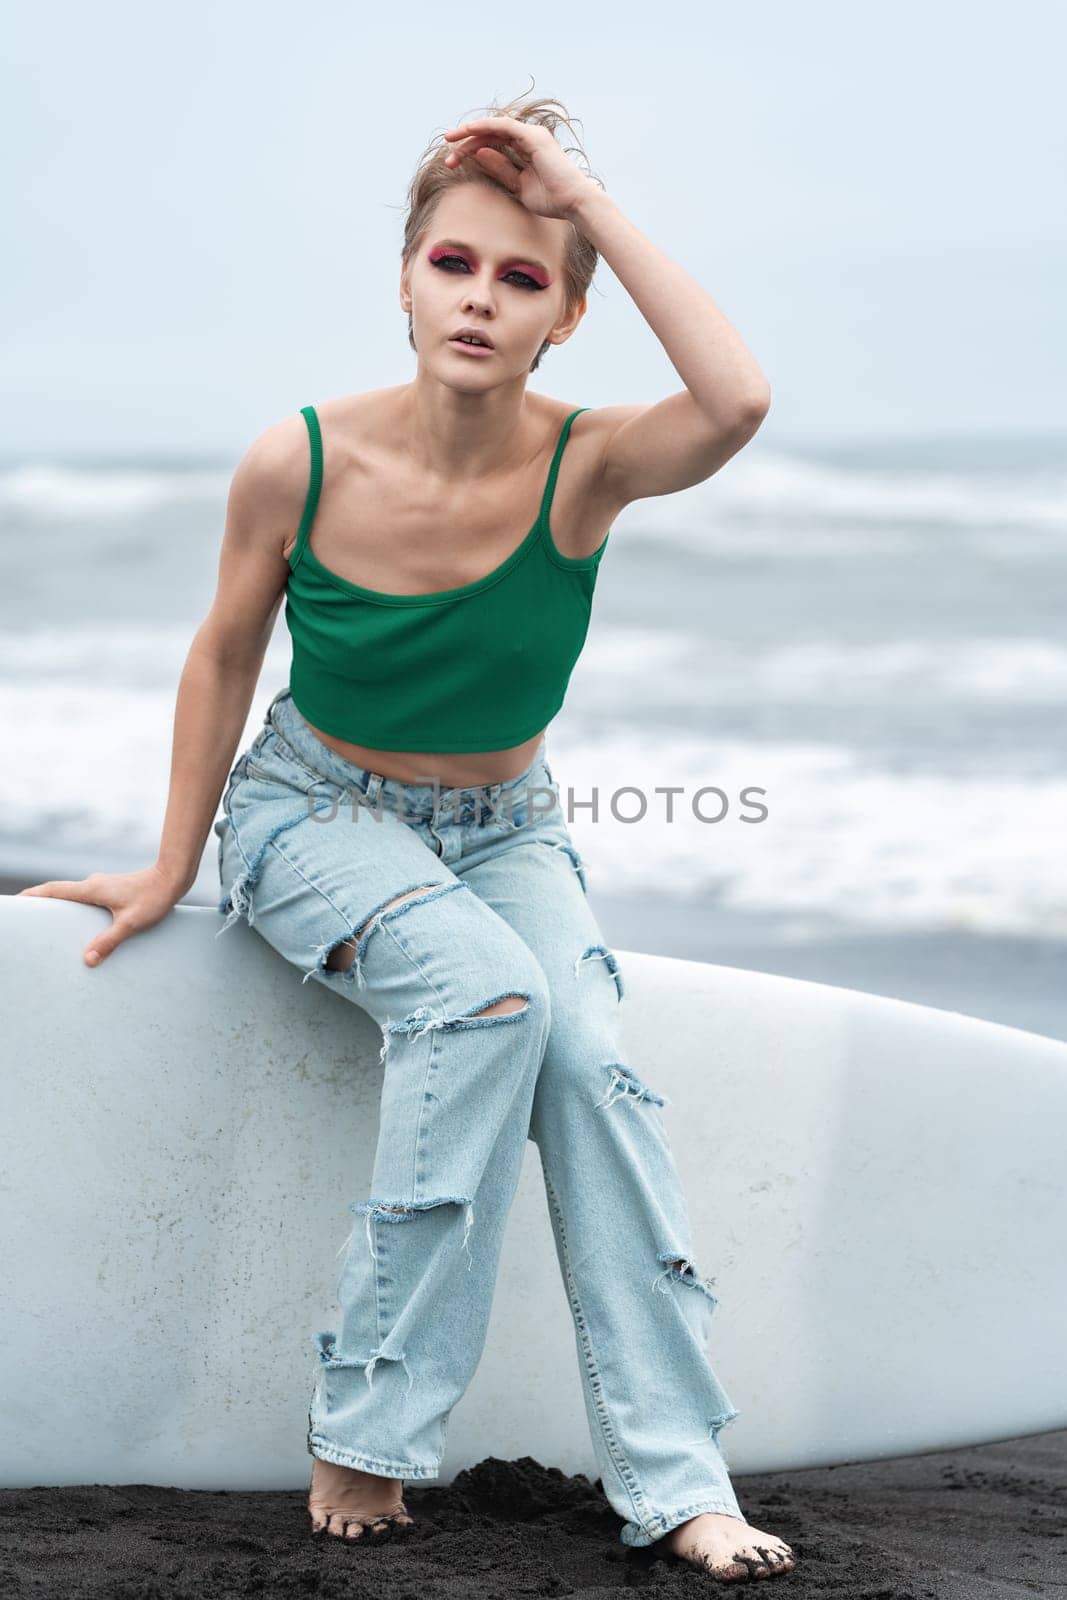 Woman wearing top and blue jeans sitting on surf board lying on sand, on background of sea waves. Portrait of hipster Caucasian ethnicity model with short hair and bright makeup looking at camera